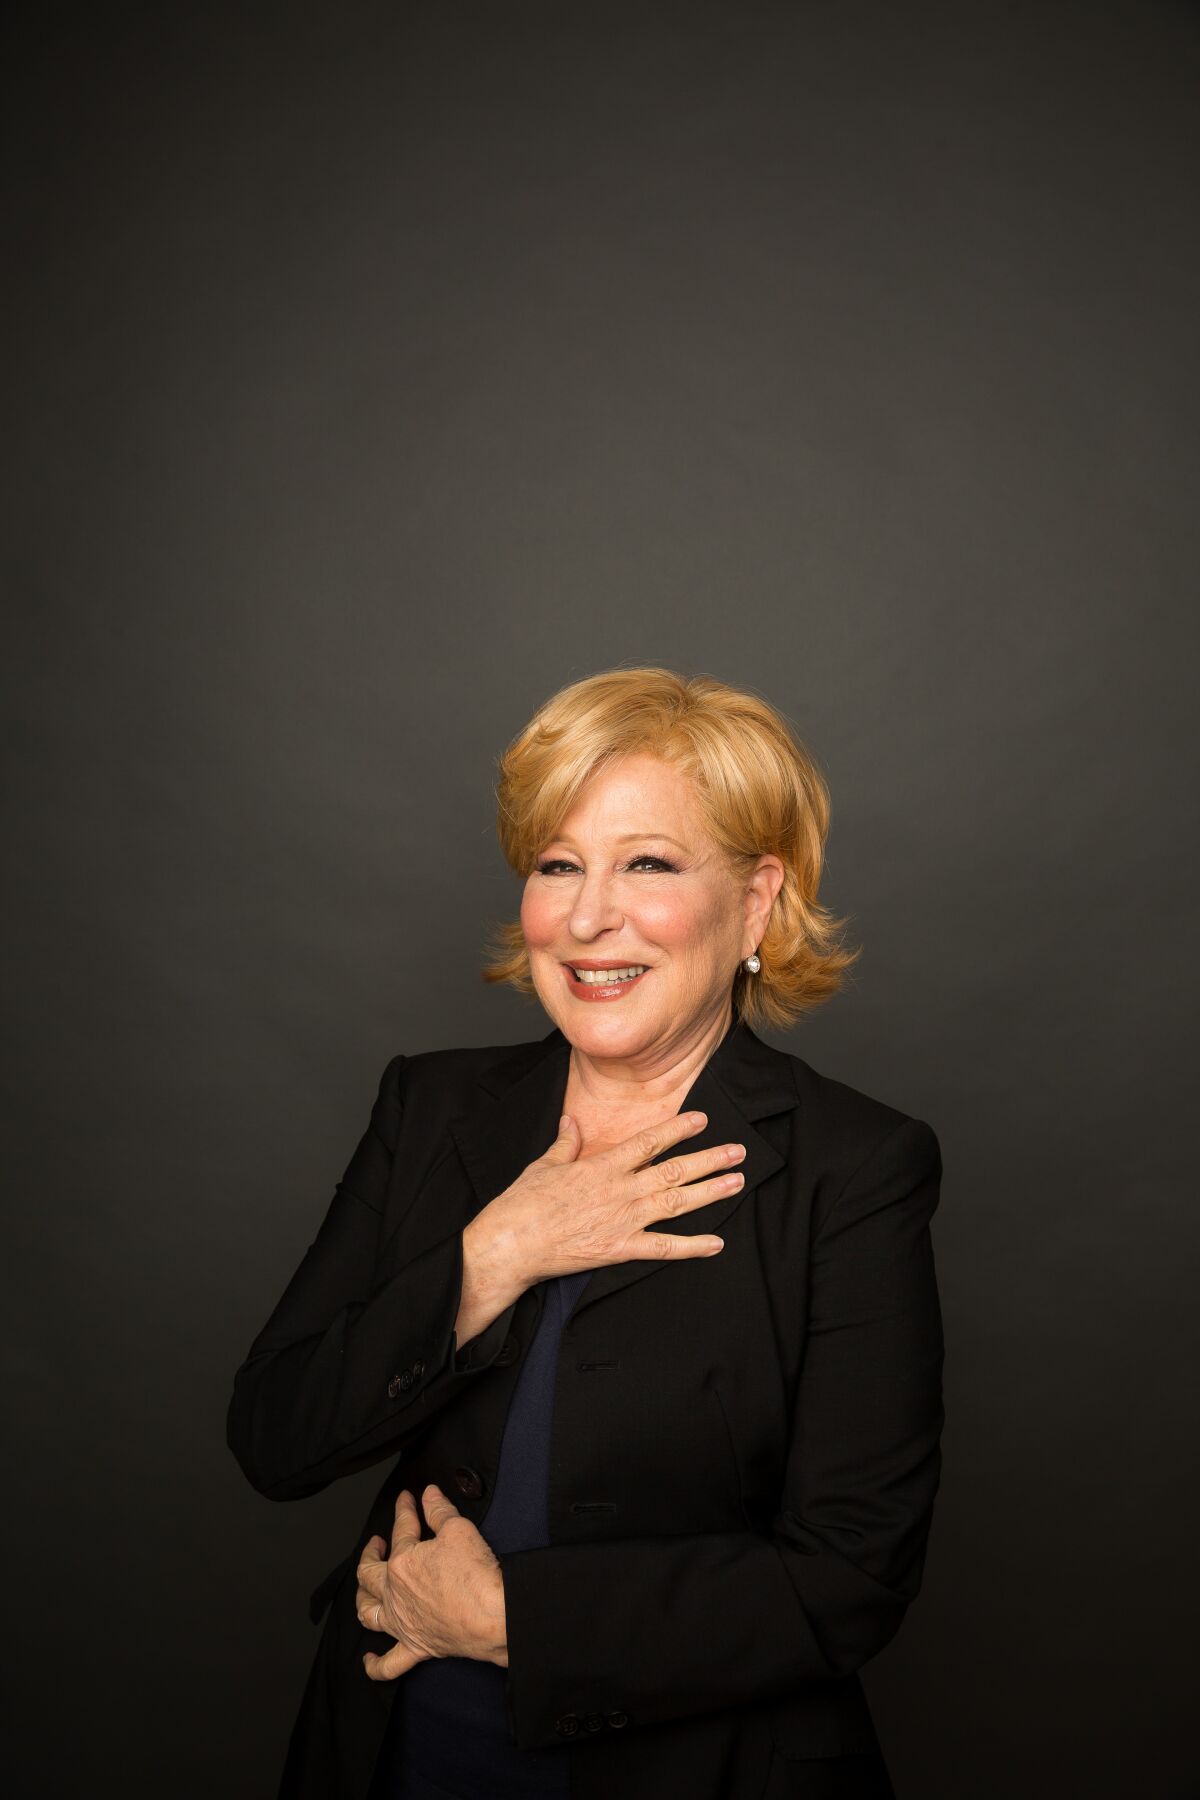 Bette Midler plays a political manager on "The Politician."